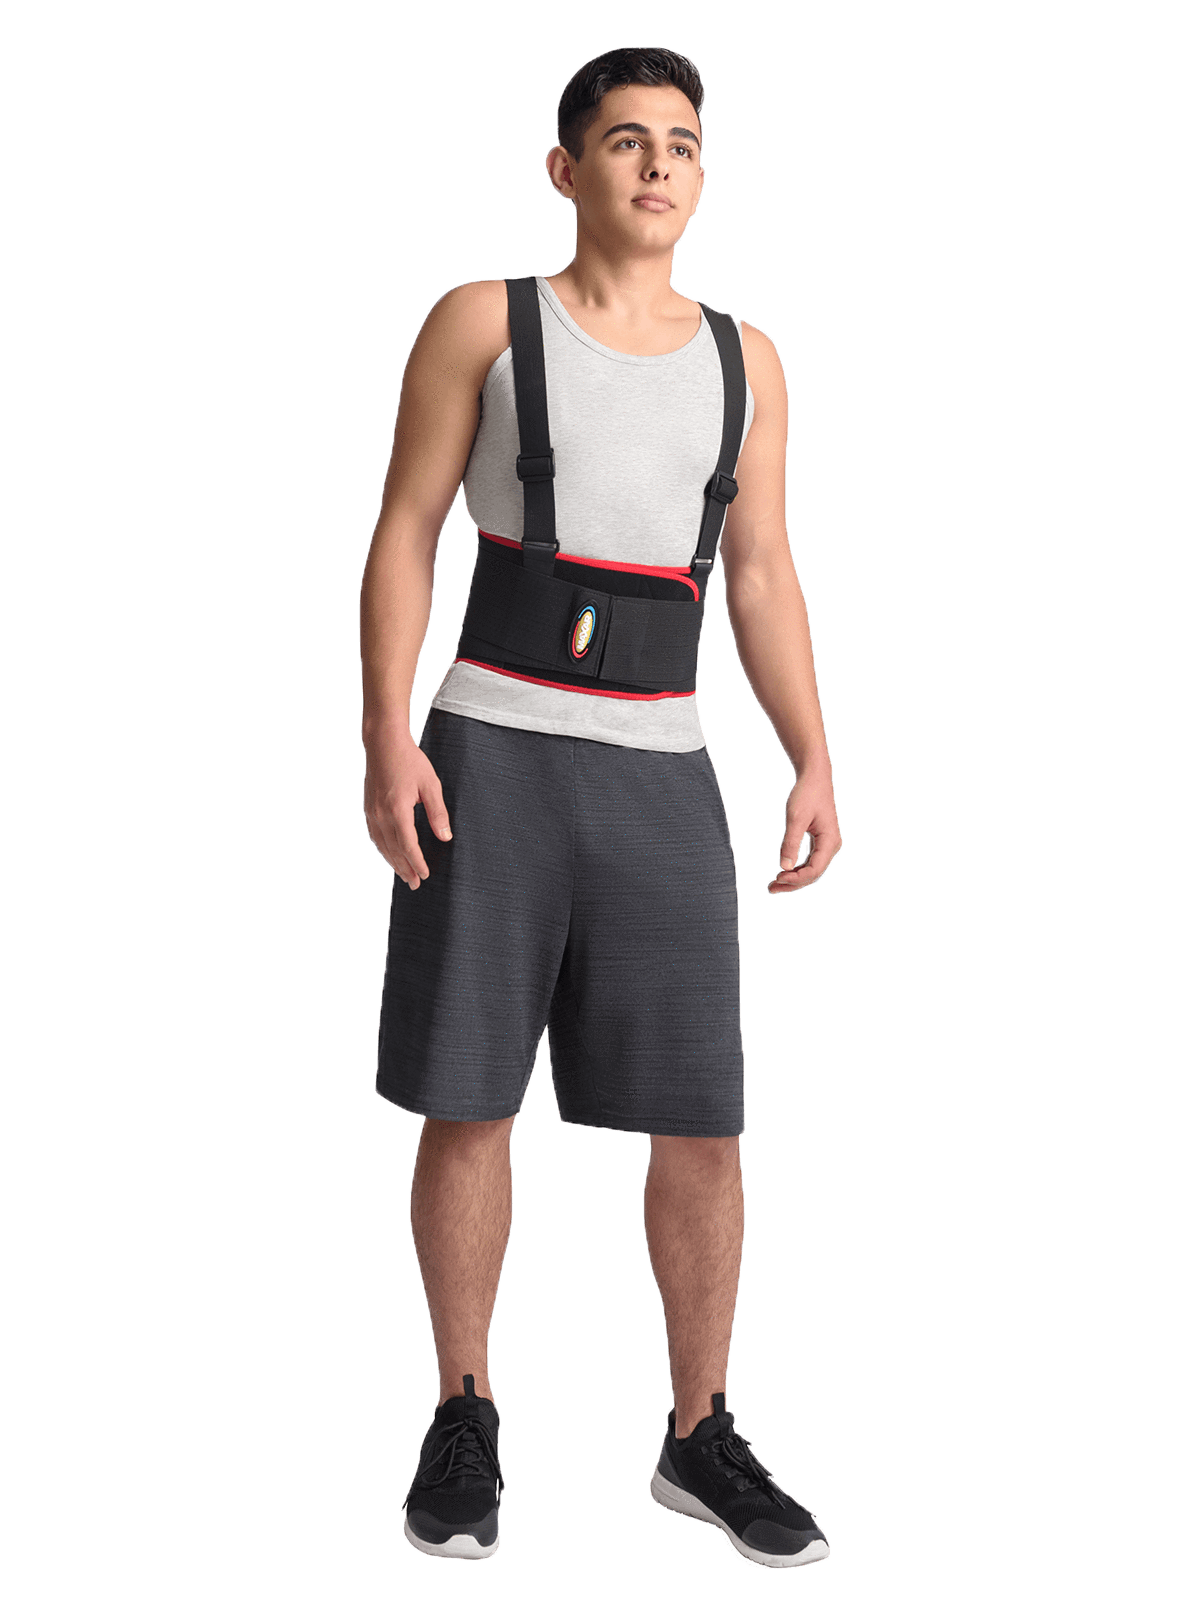  MAXAR Airprene Sports Back Brace W/ Powerful 18 Magnets, Warm &  Breathable, Six Spring Metal Stays, Prevent Back Injuries, Support Belt for  Lumbosacral, Heavy Lifting & Lower Back Pain, BMS-512 M 